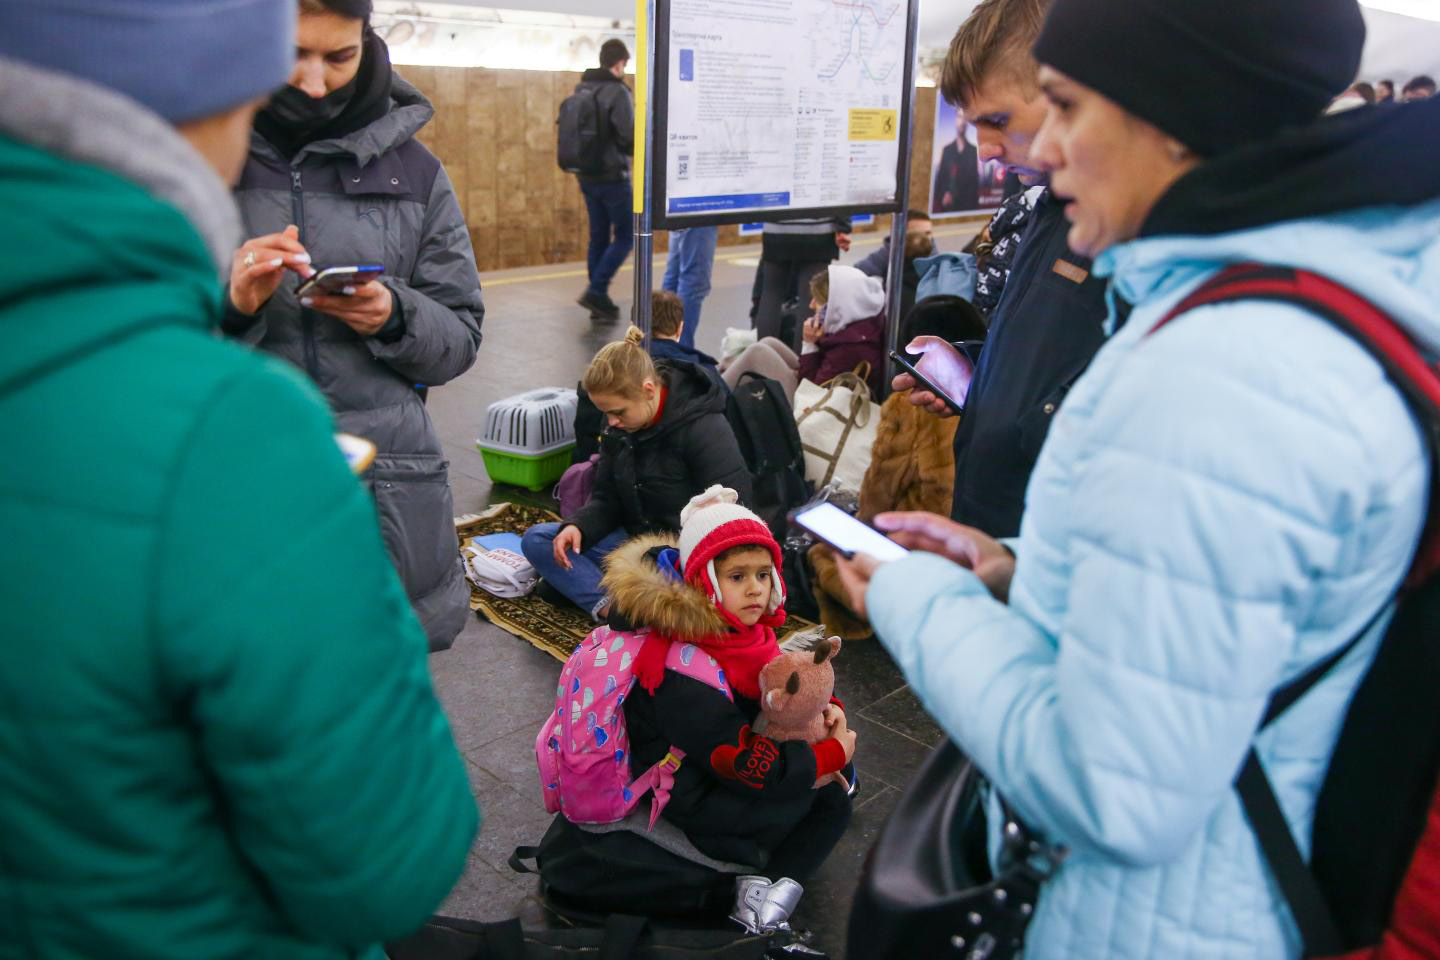 a boy with a teddy bear sits on the ground surrounded by bags and people on their phones